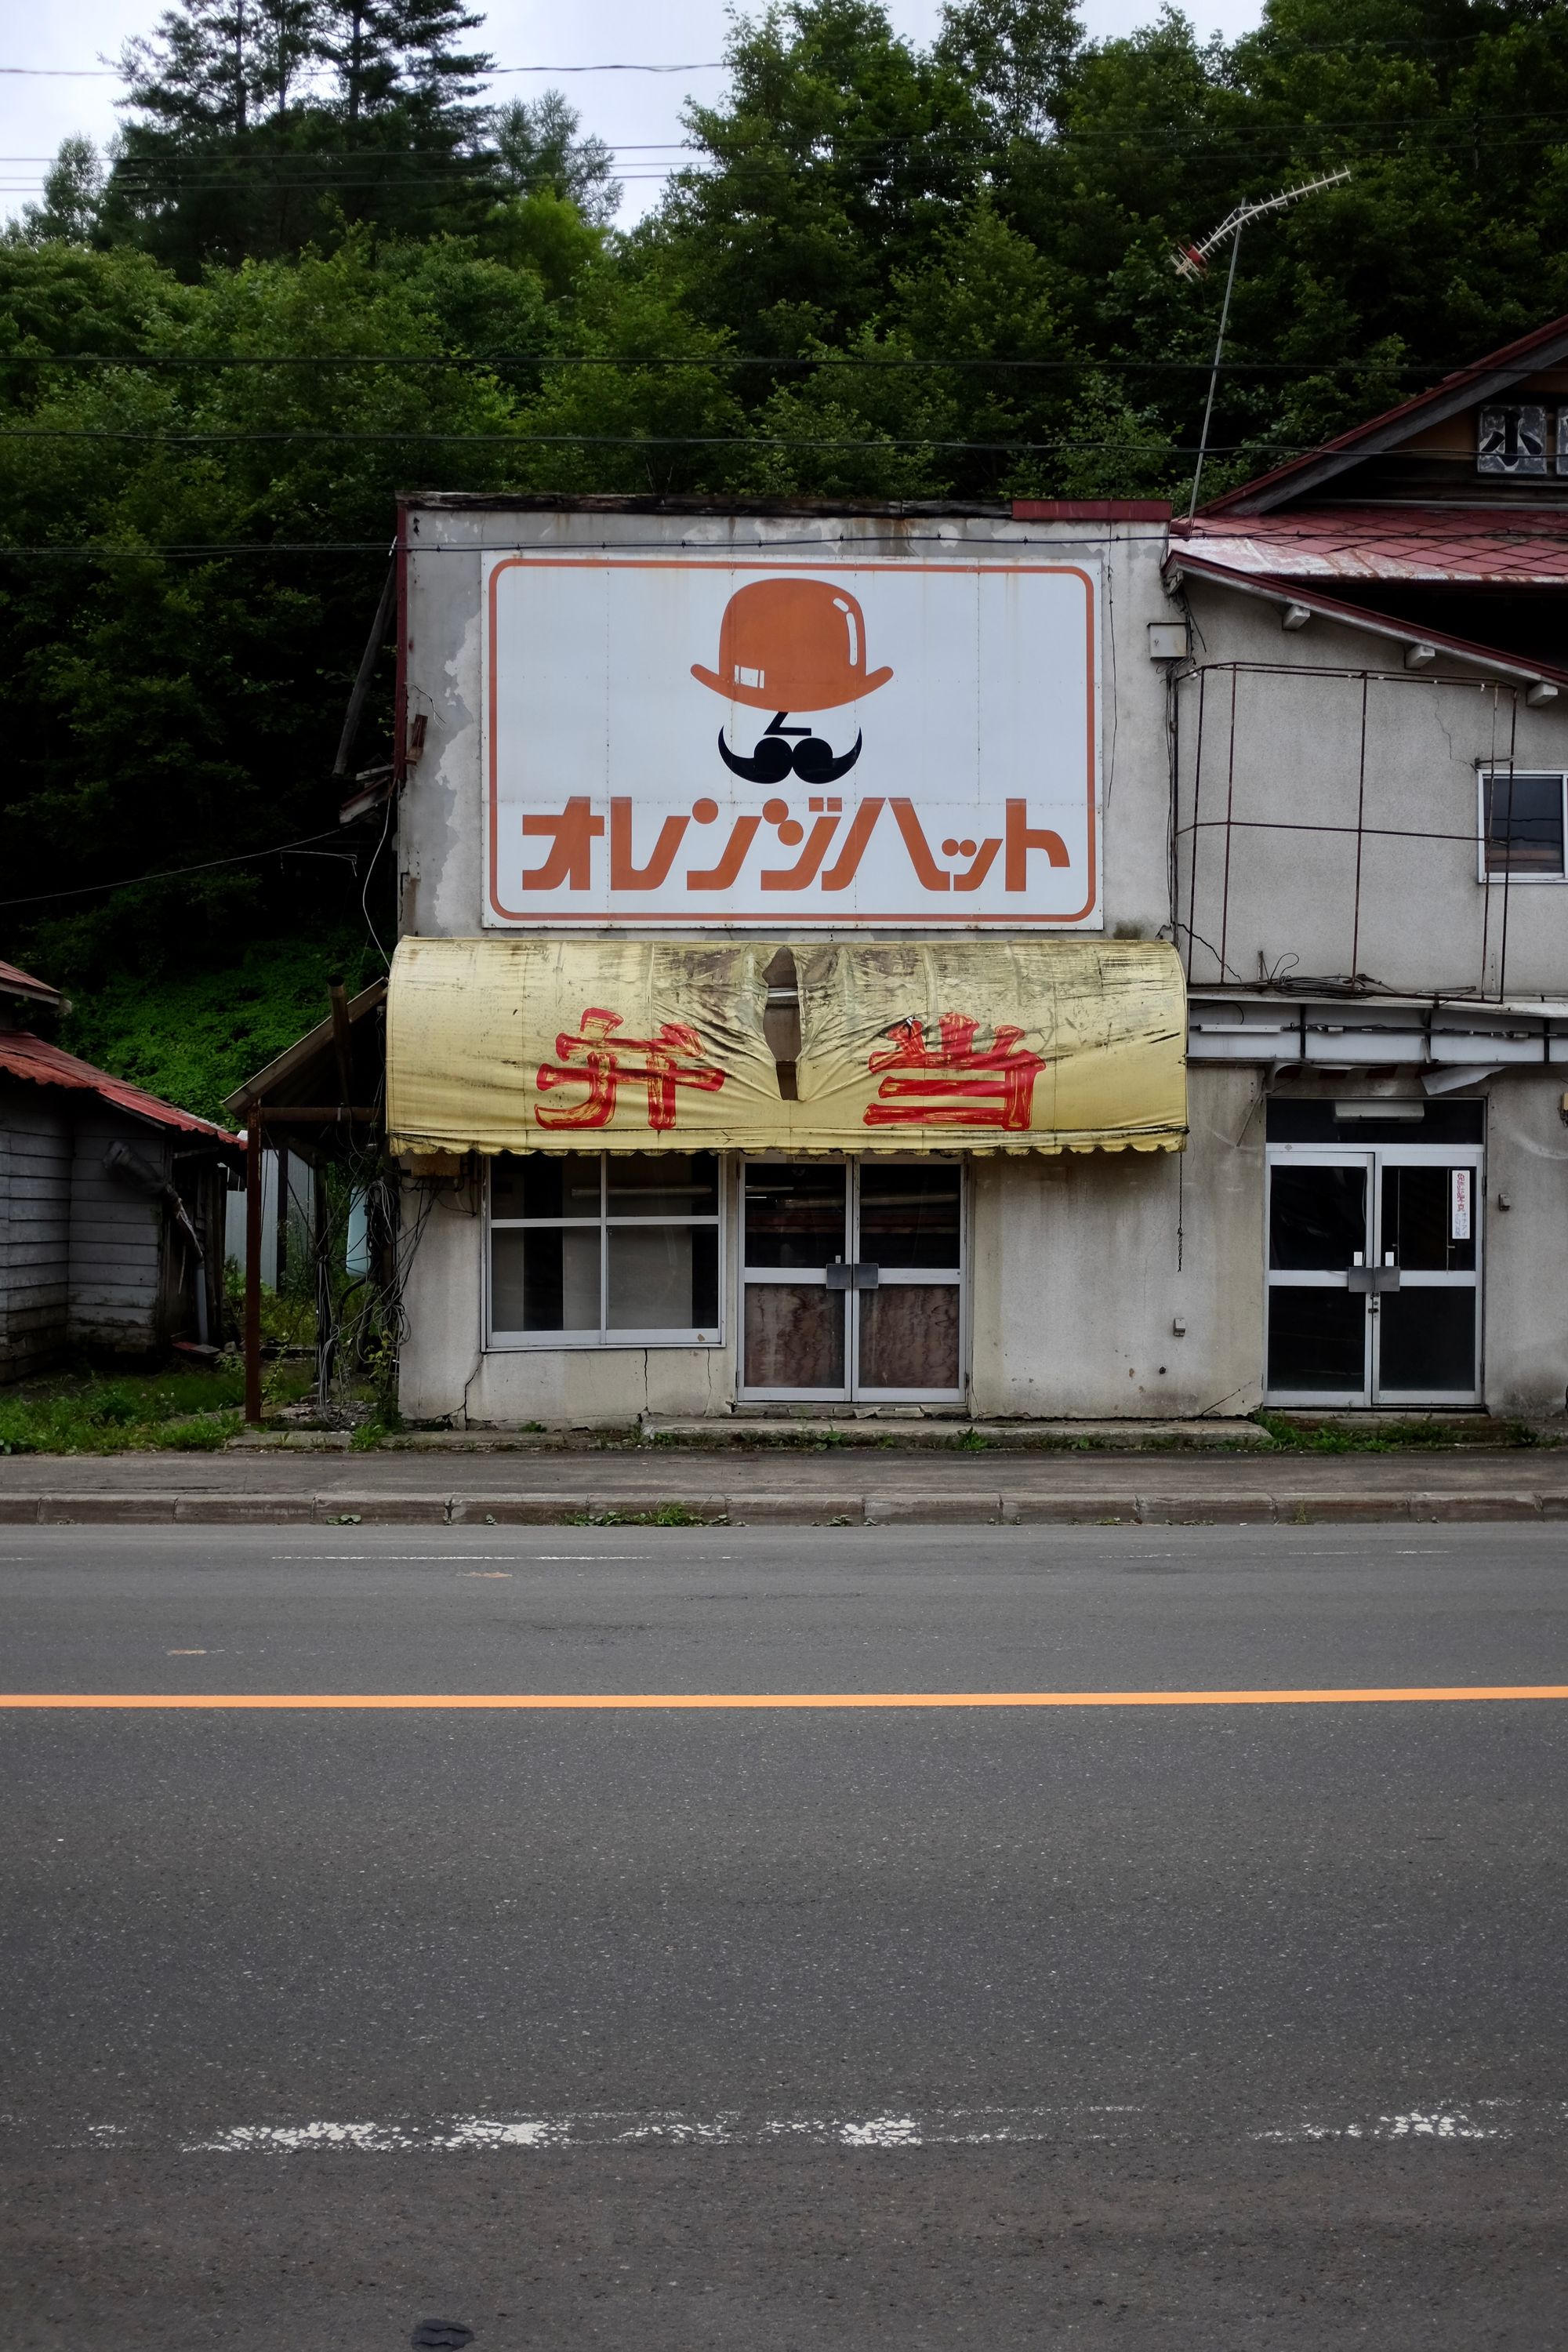 One of the many abandoned storefronts of Ochiai, this one showing the silhouette of a mustachioed man in an orange hat.